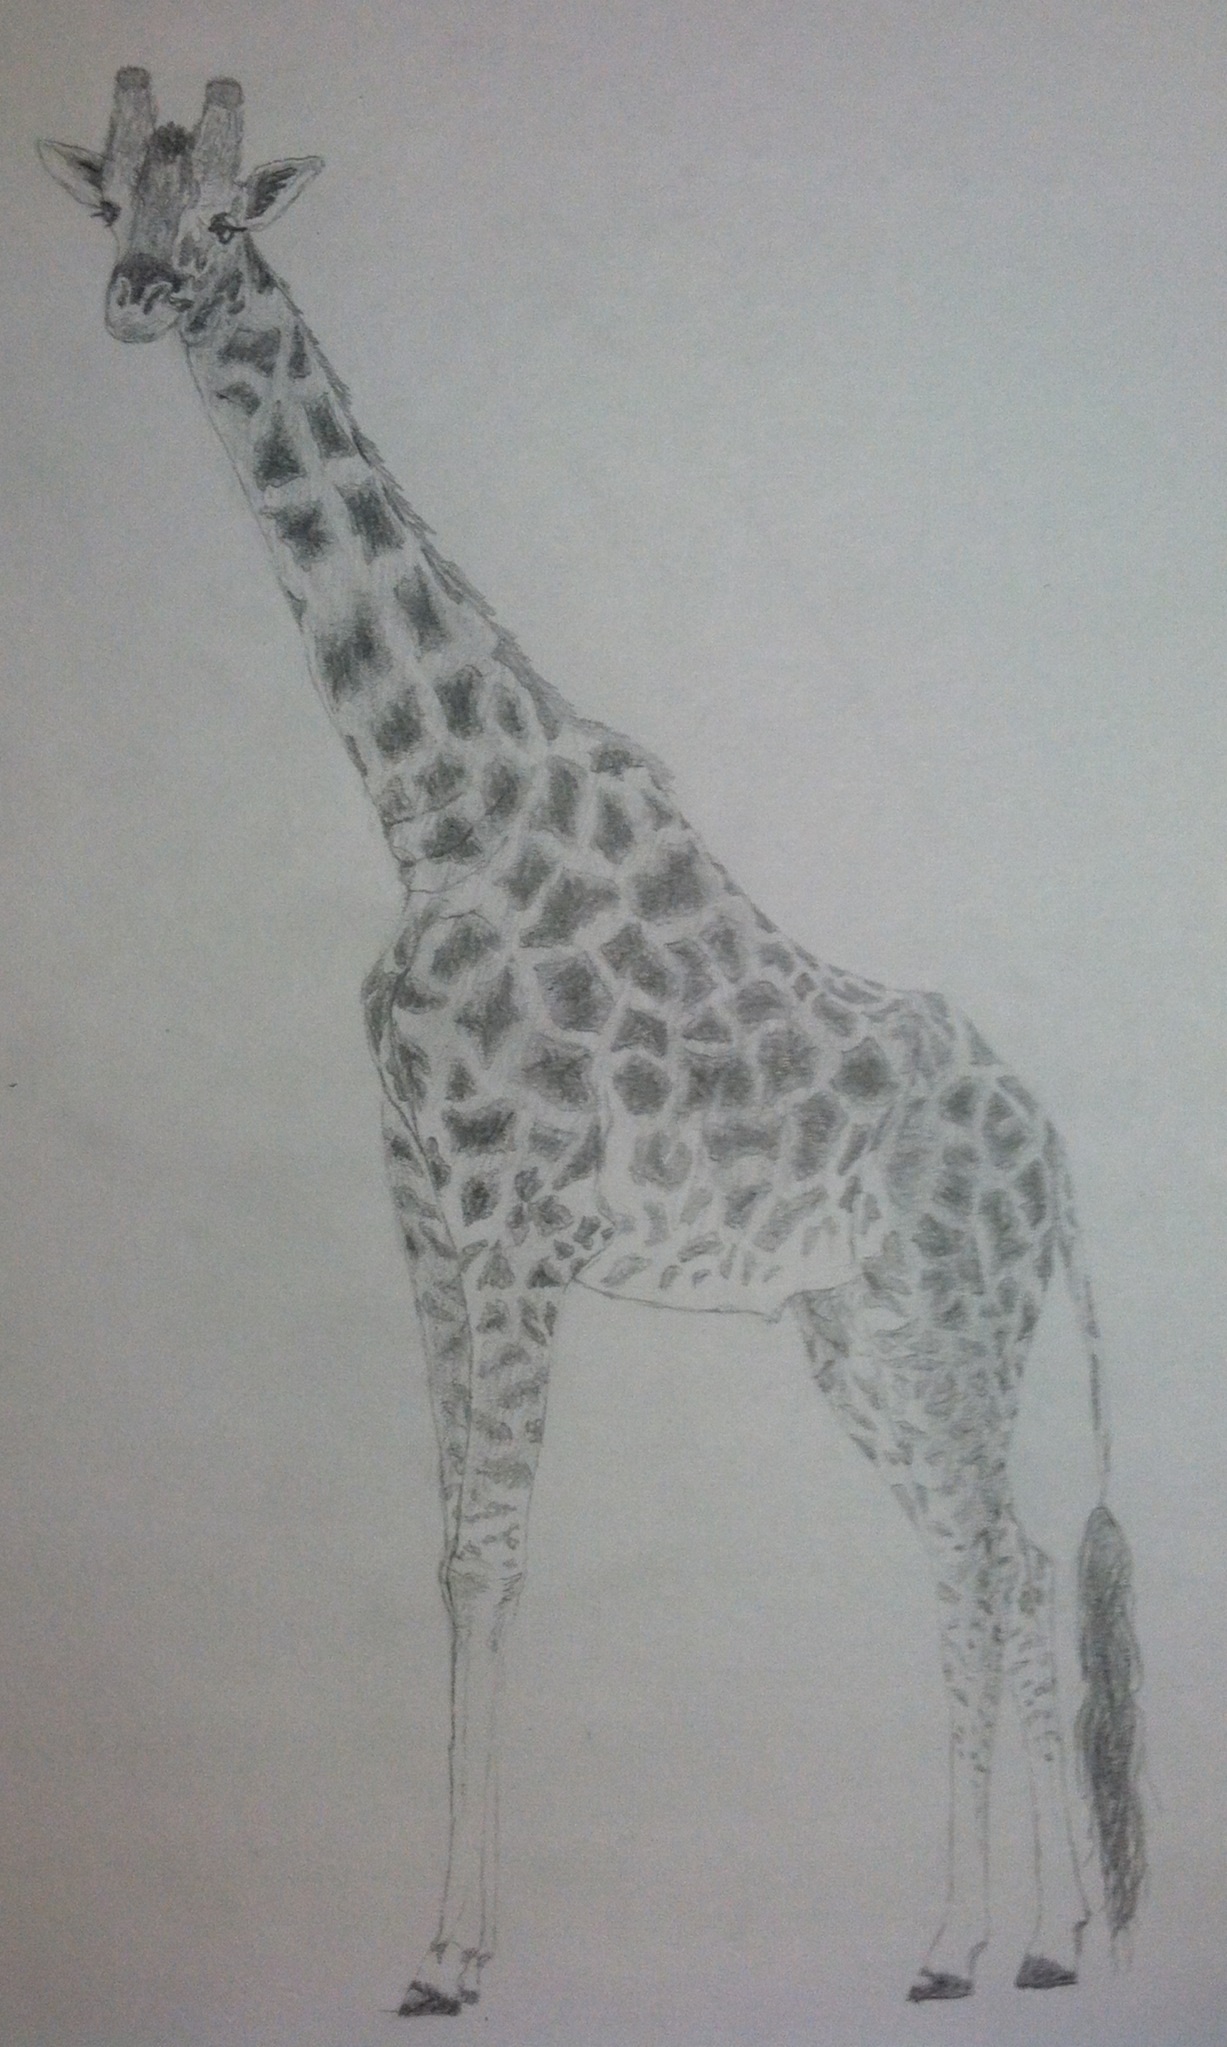 how to draw a real giraffe step by step